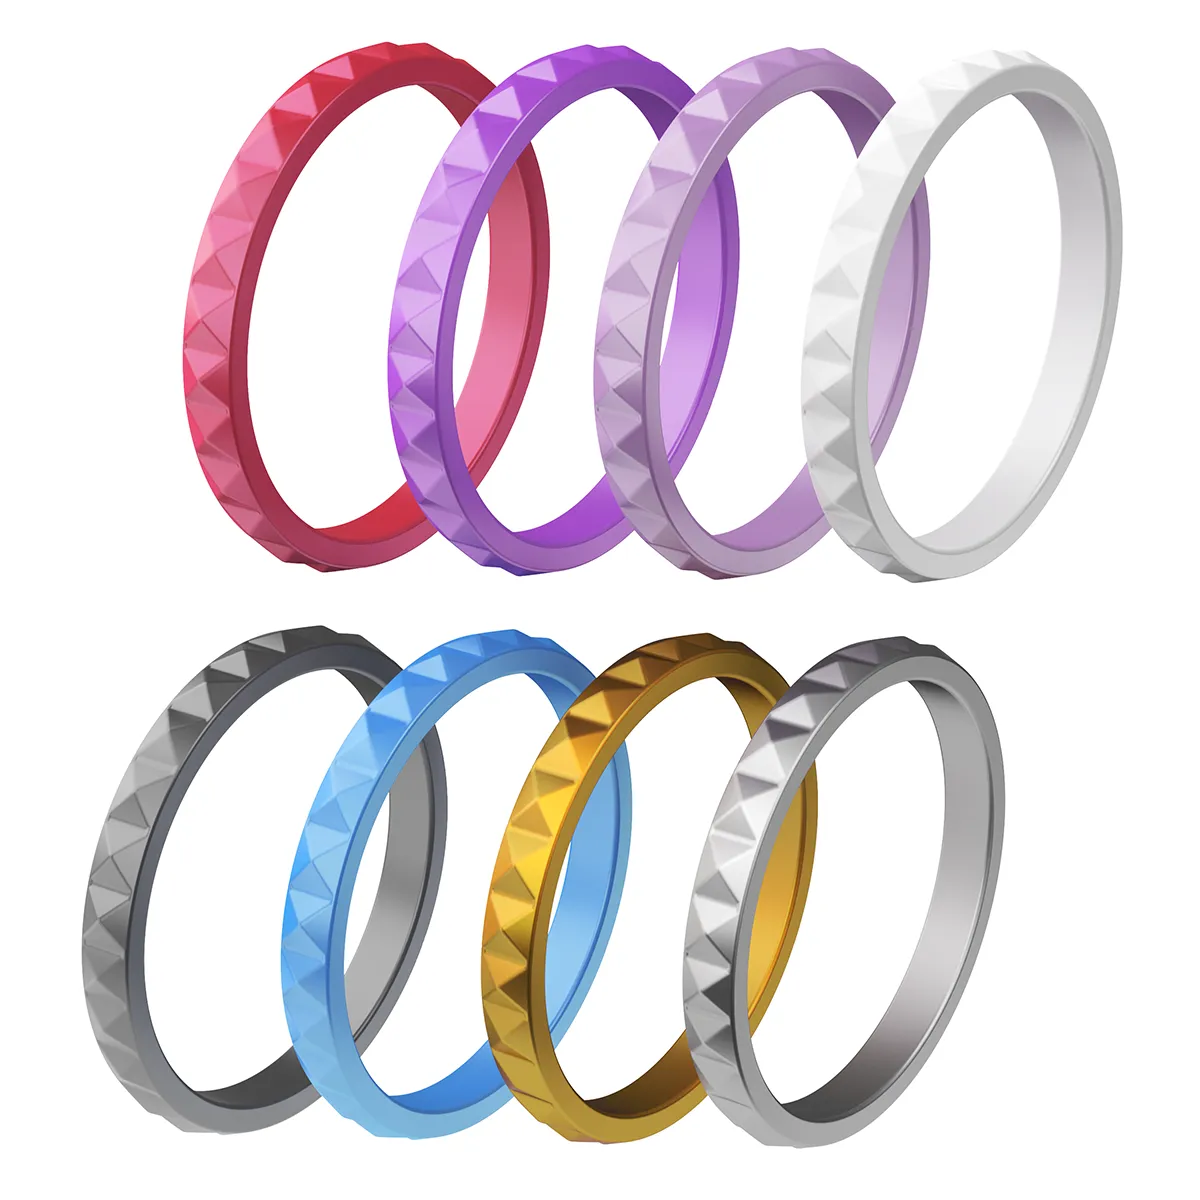 Men's Performance Silicone Ring - Silicone Wedding Rings | Etrnl